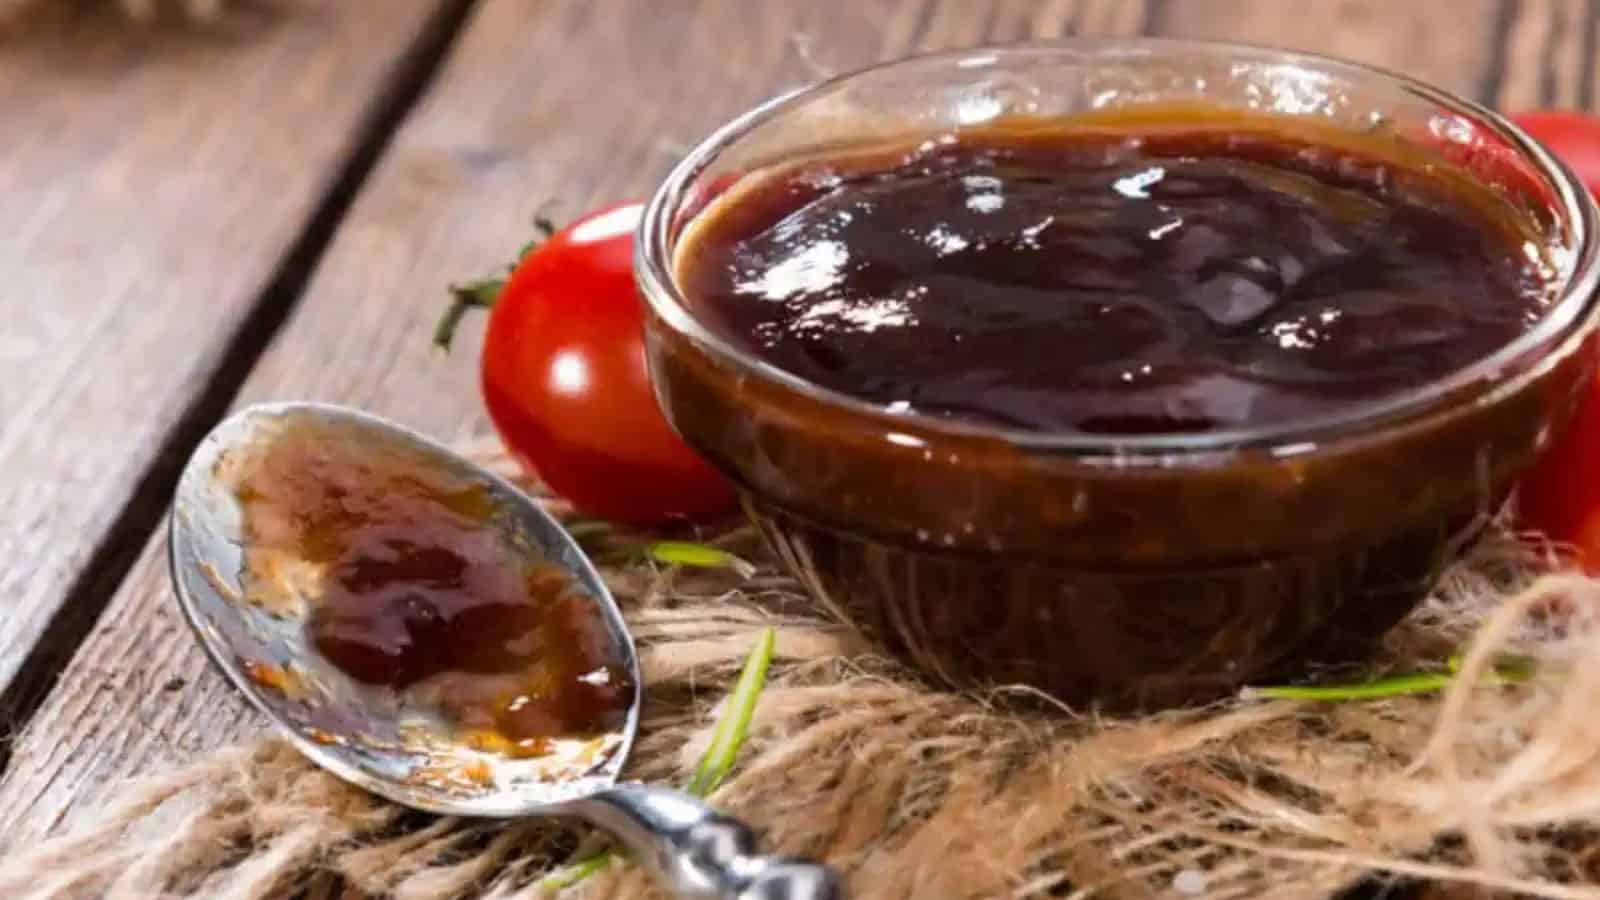 A small glass bowl filled with barbecue sauce sitting beside a spoon with barbecue sauce.